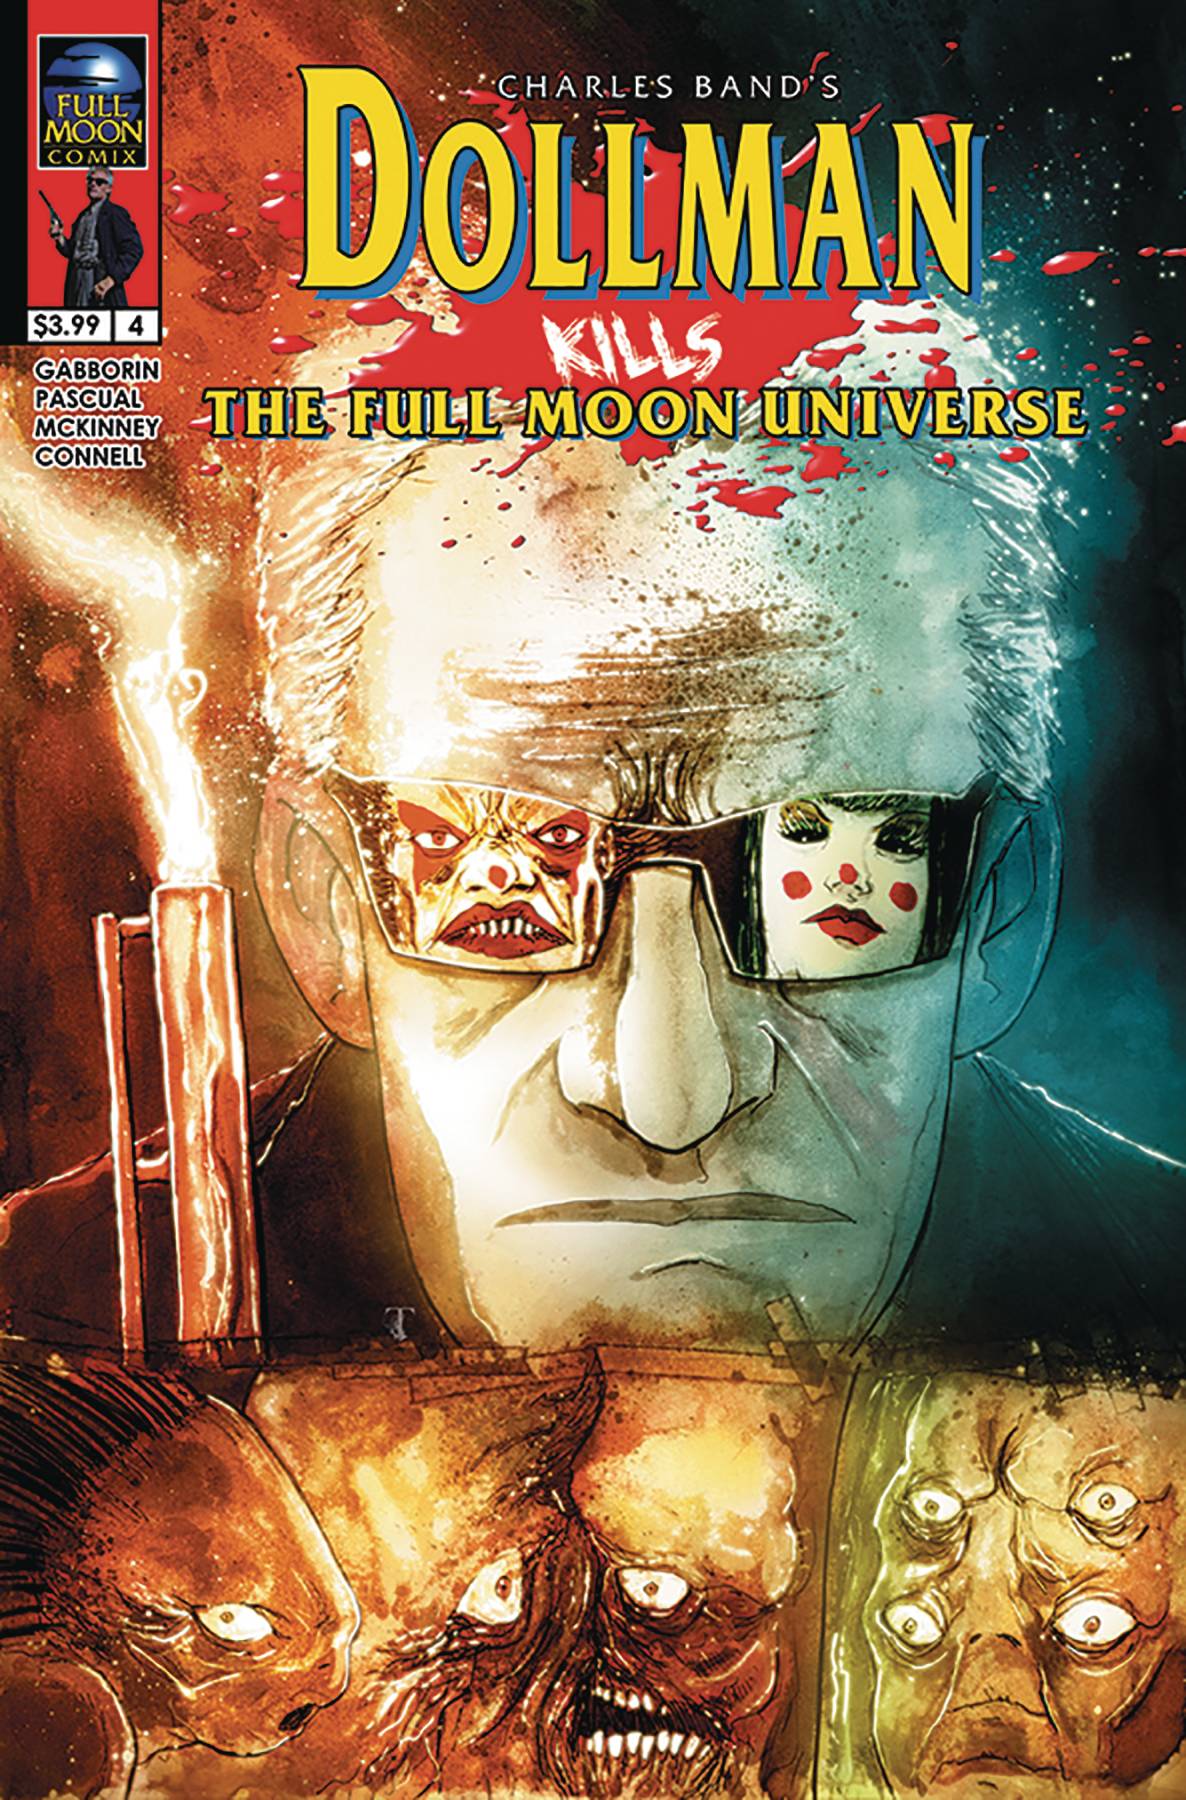 Dollman Kills The Full Moon Universe #4 Cover A Templesmith (Mature) (Of 6)